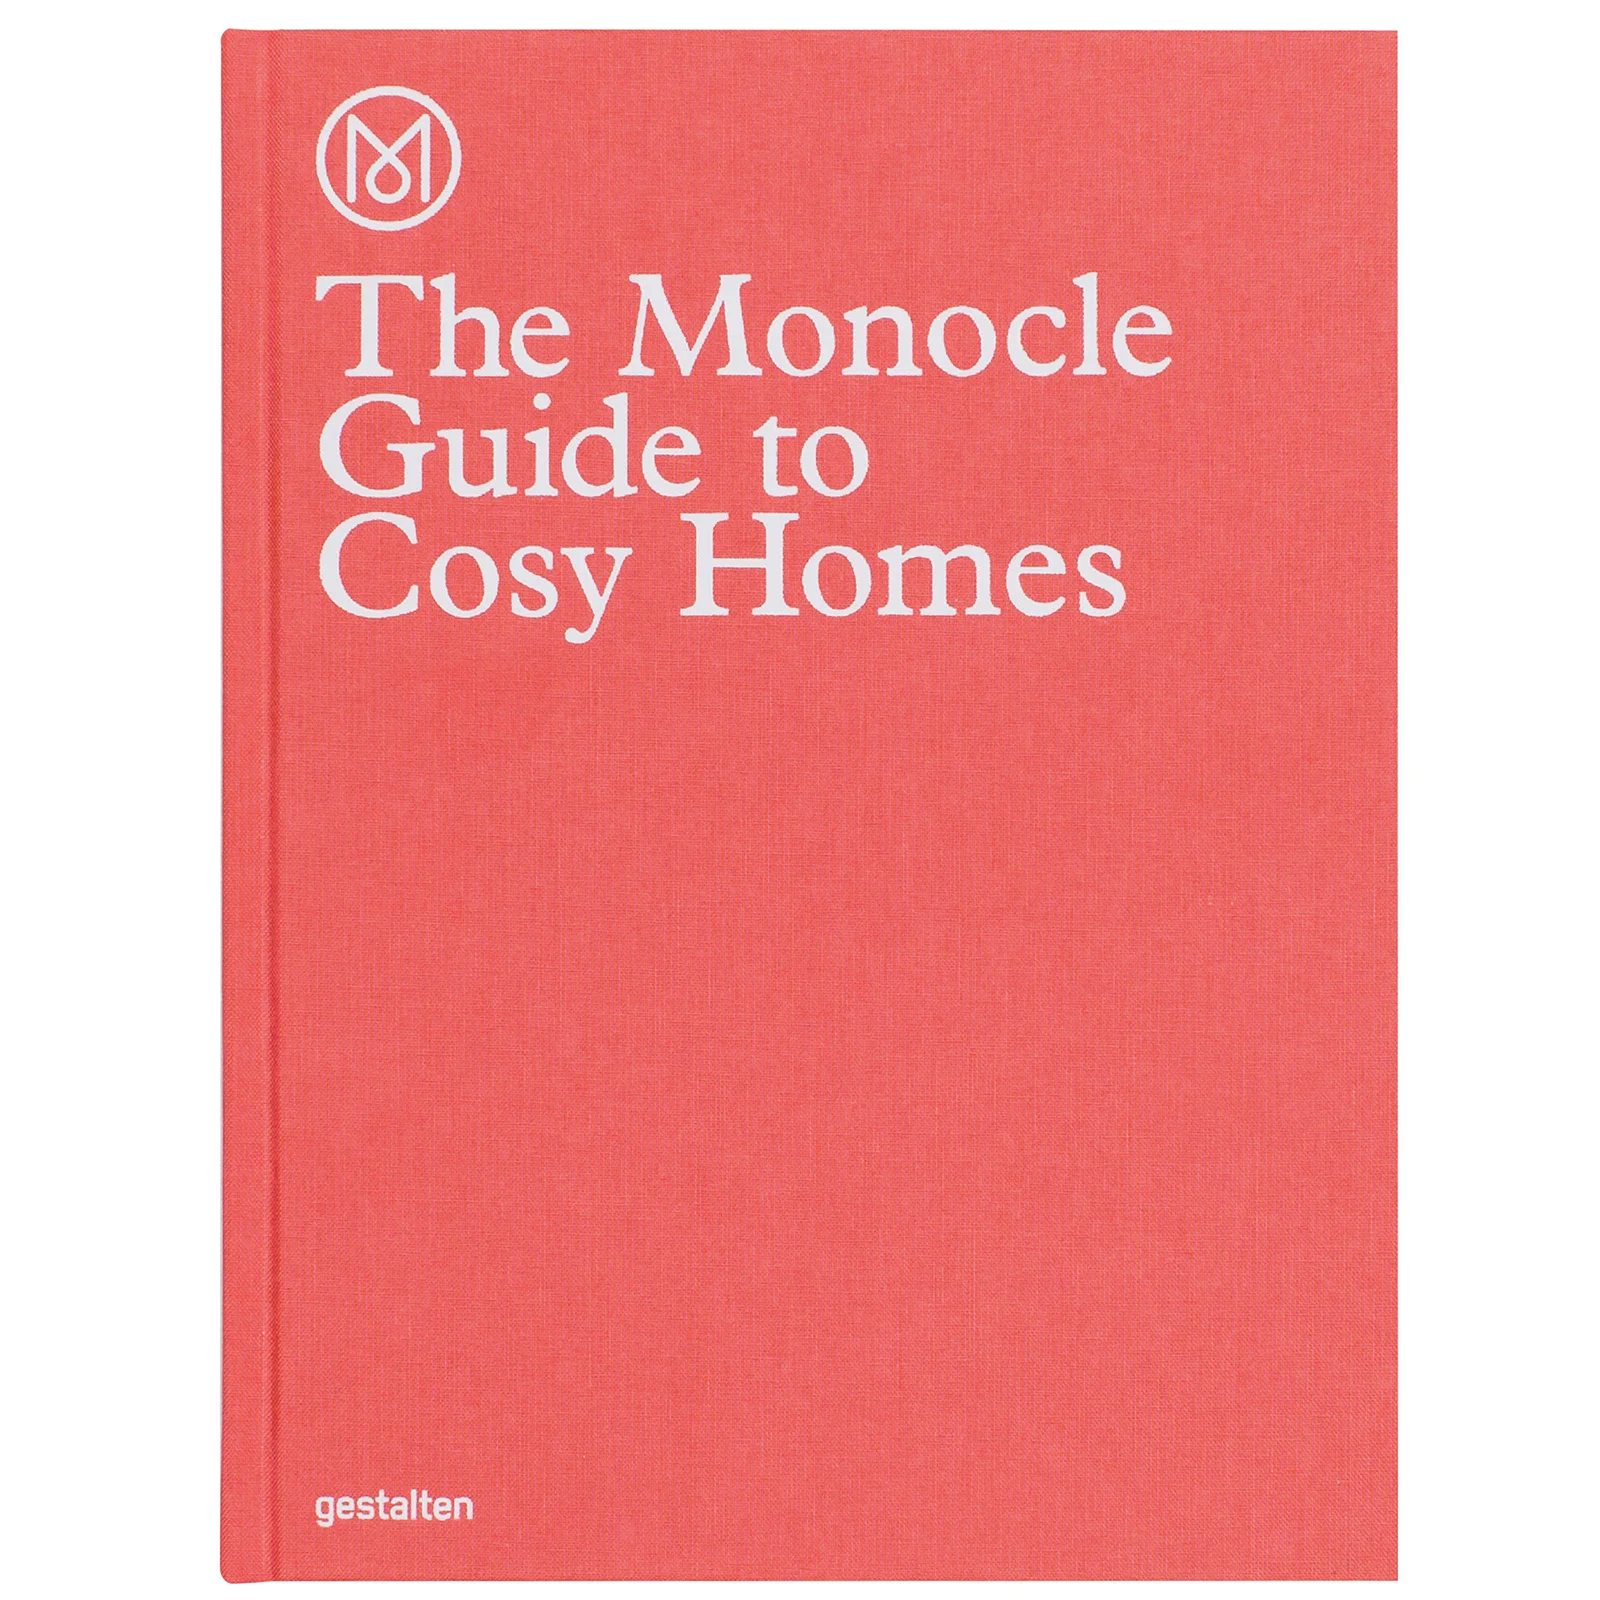 Monocle: The Guide to Cosy Homes Image 1